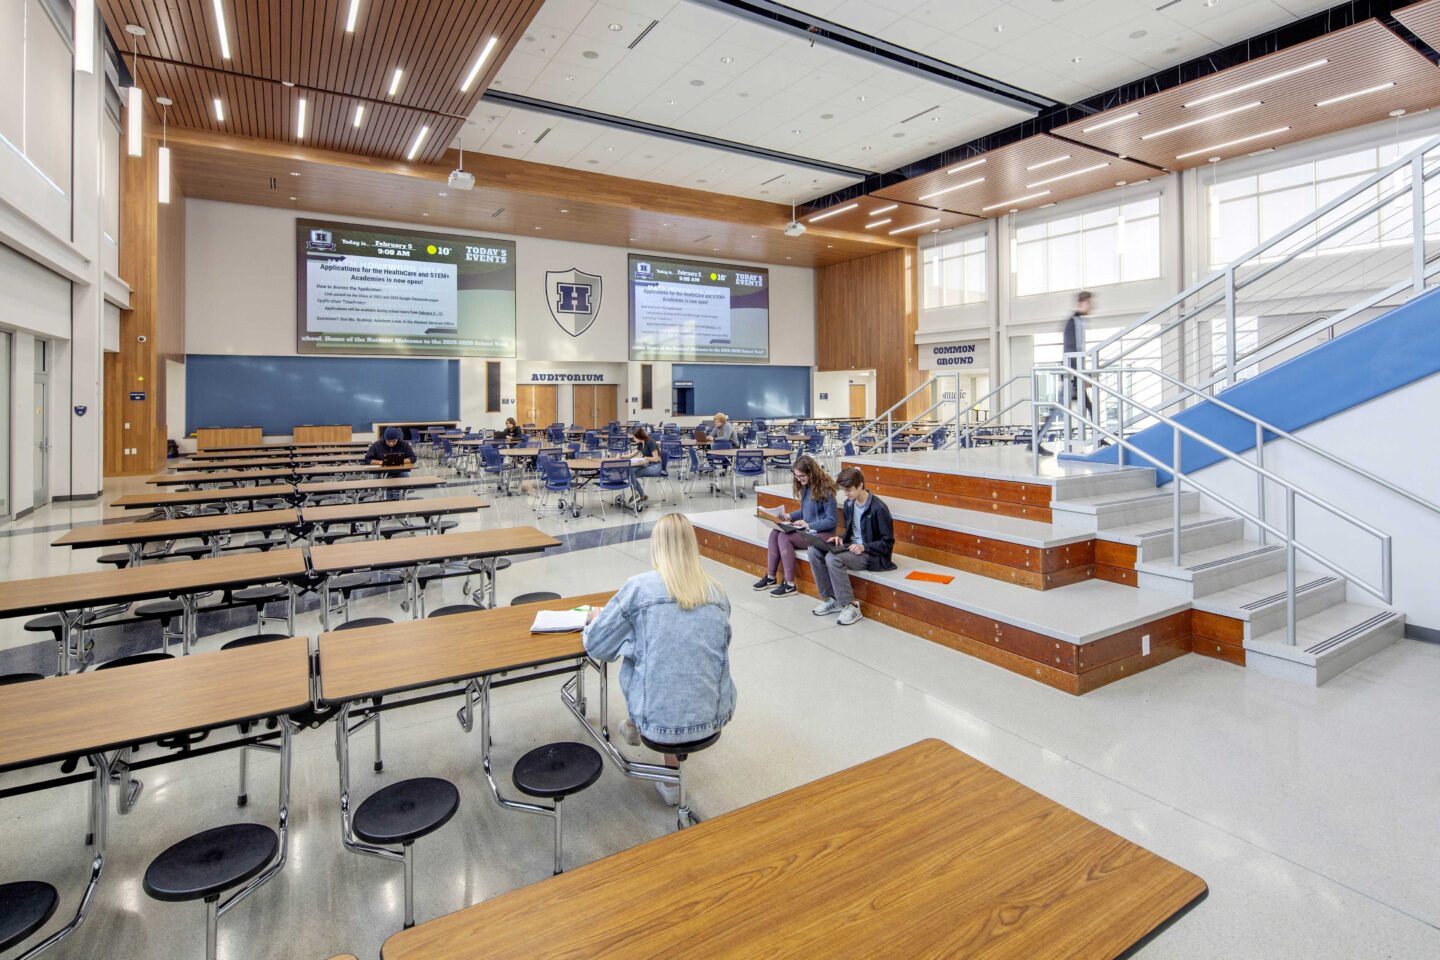 A modern learning staircase leads into a large, open forum with cafeteria-type seating and a wall of windows at Hudson High School